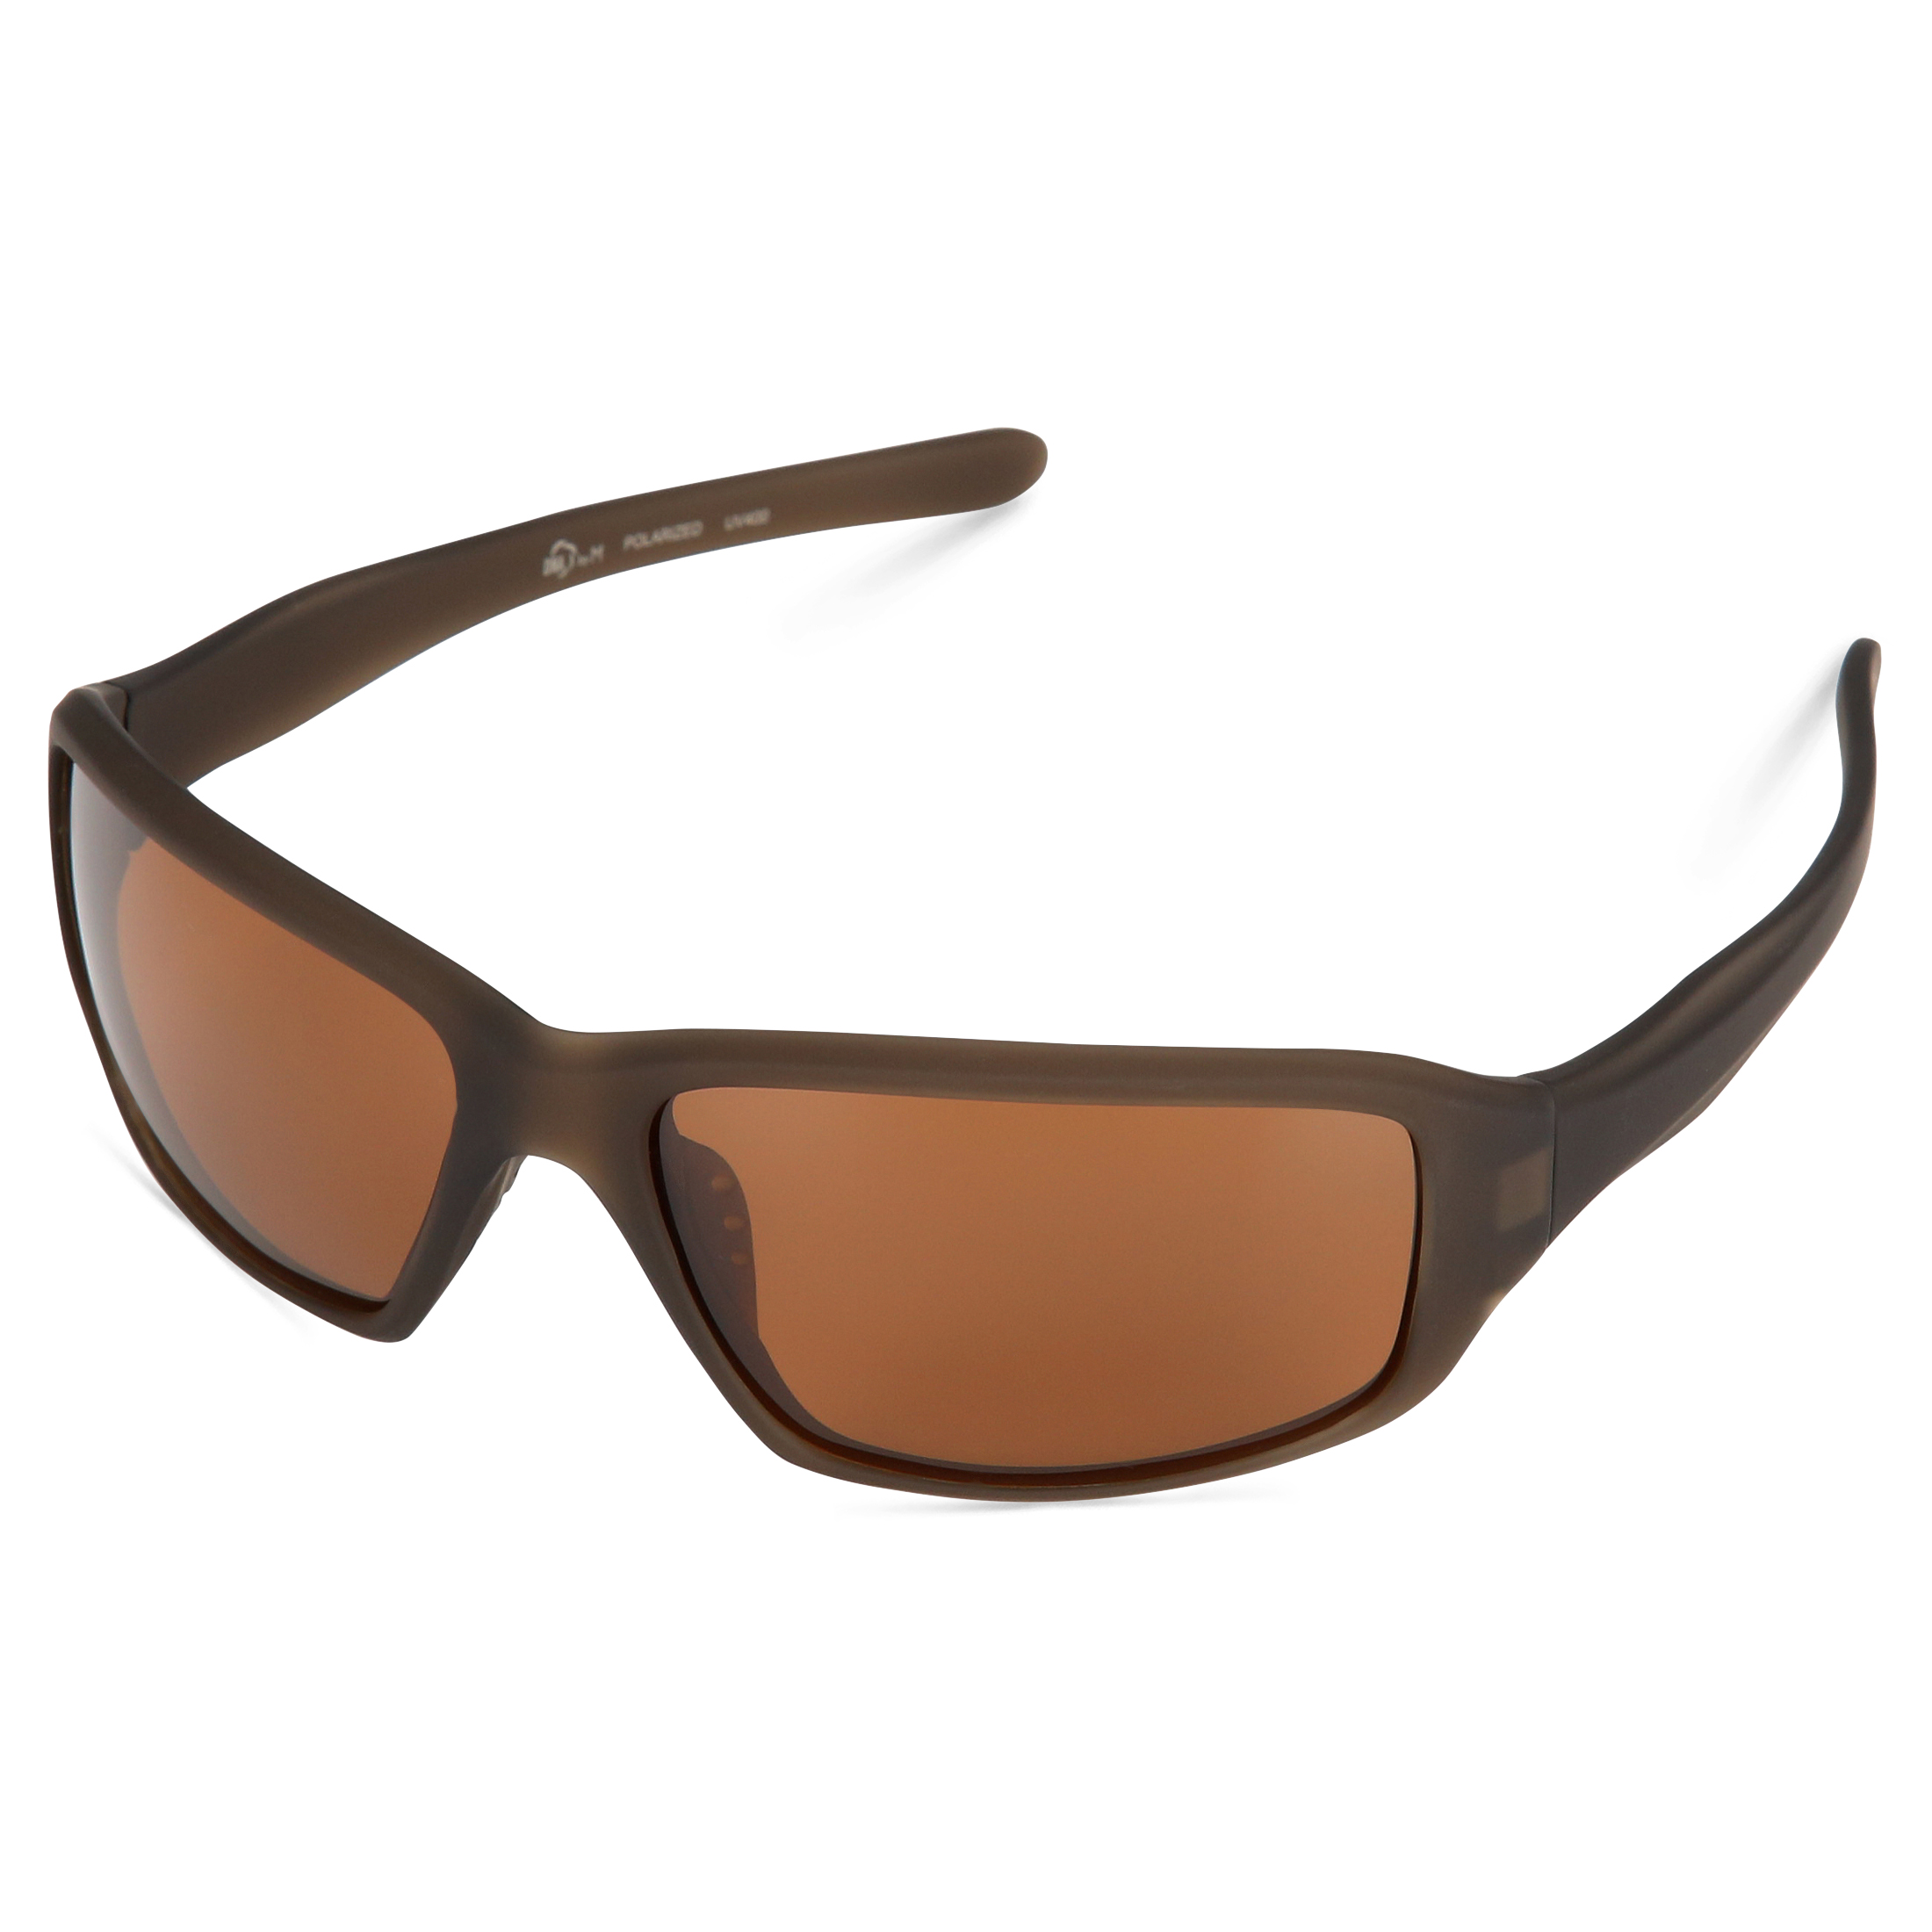 DNA Polarized Sunglasses, Unisex, A3012, Brown, 64-18-134 - image 4 of 6